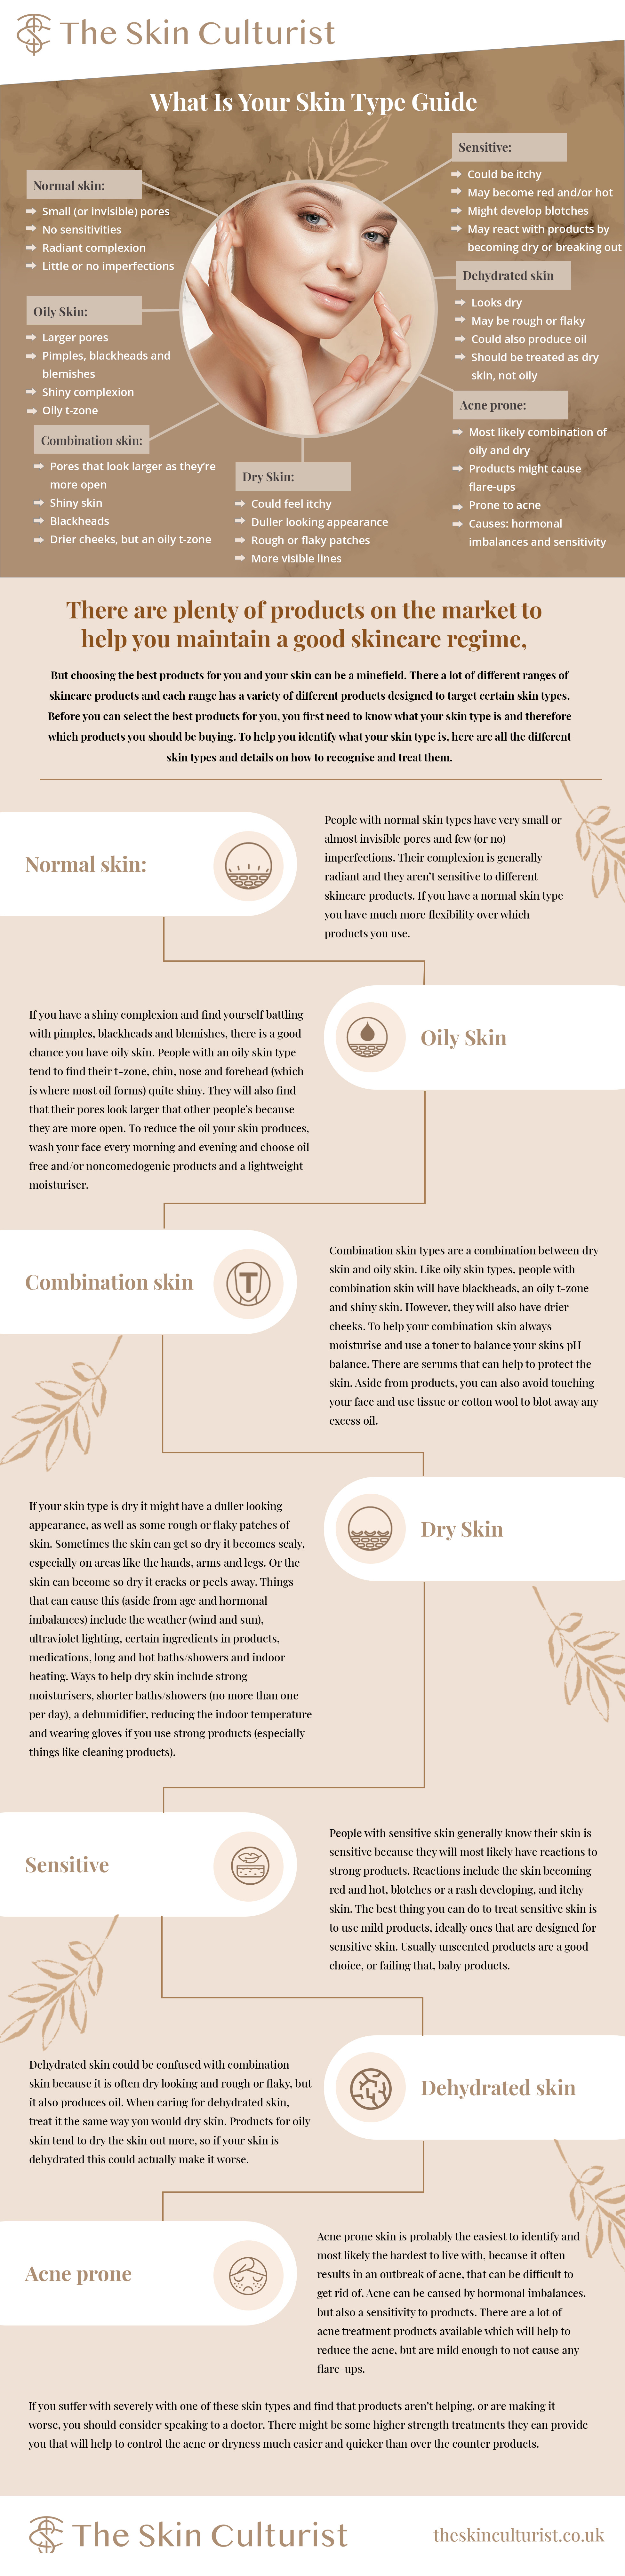 What Is My Skin Type? #Infographic